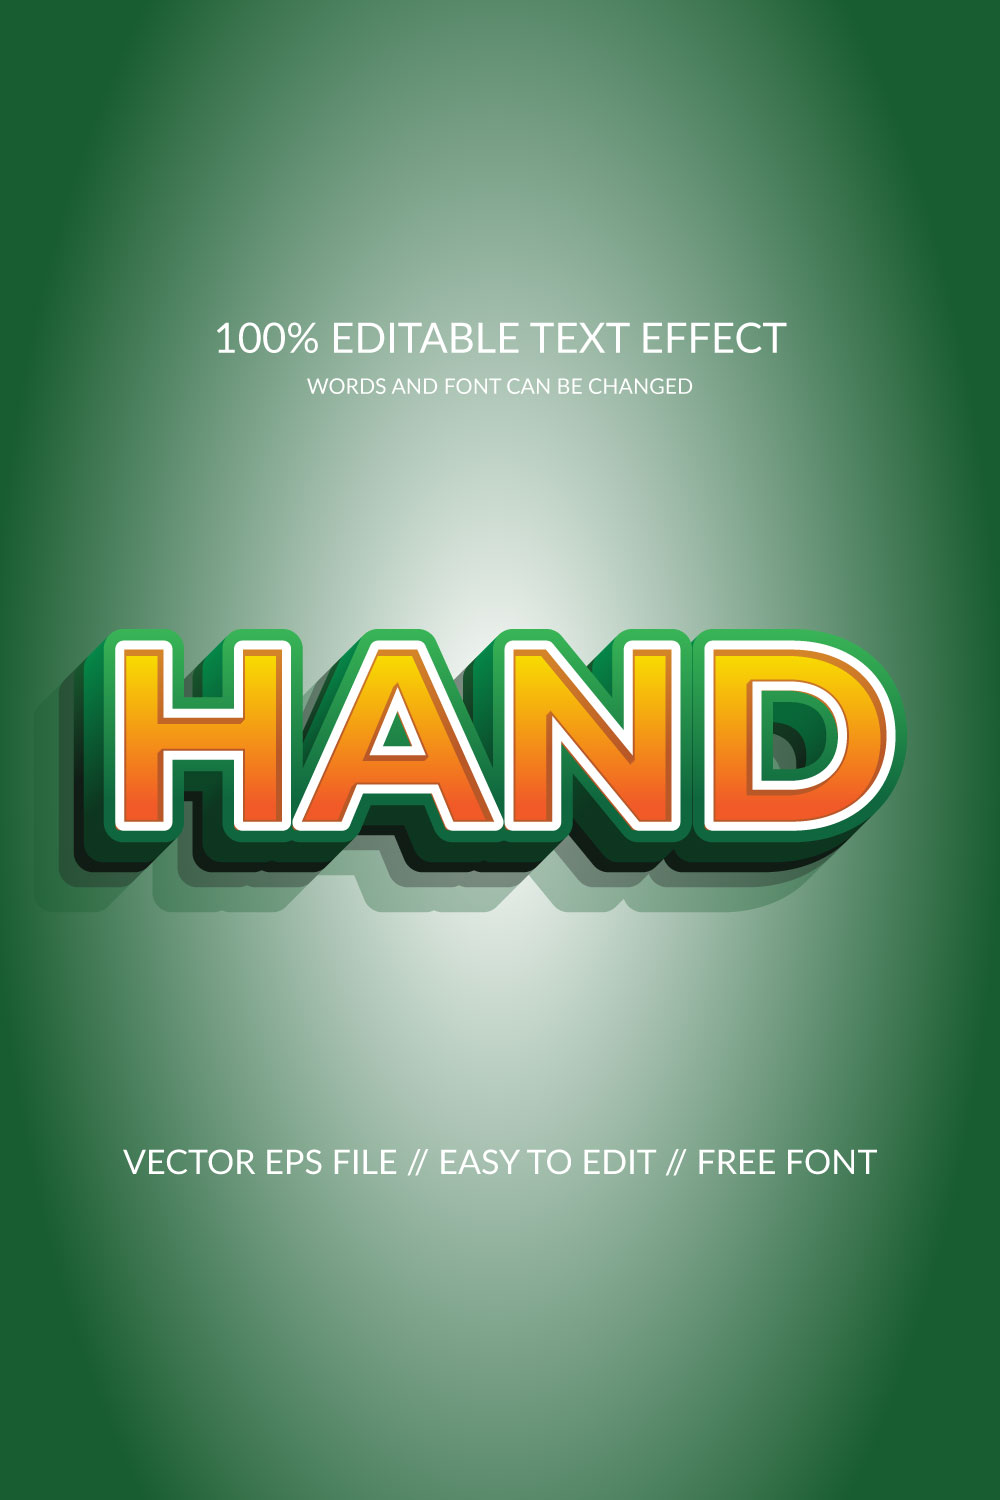 Hand text effect pinterest preview image.